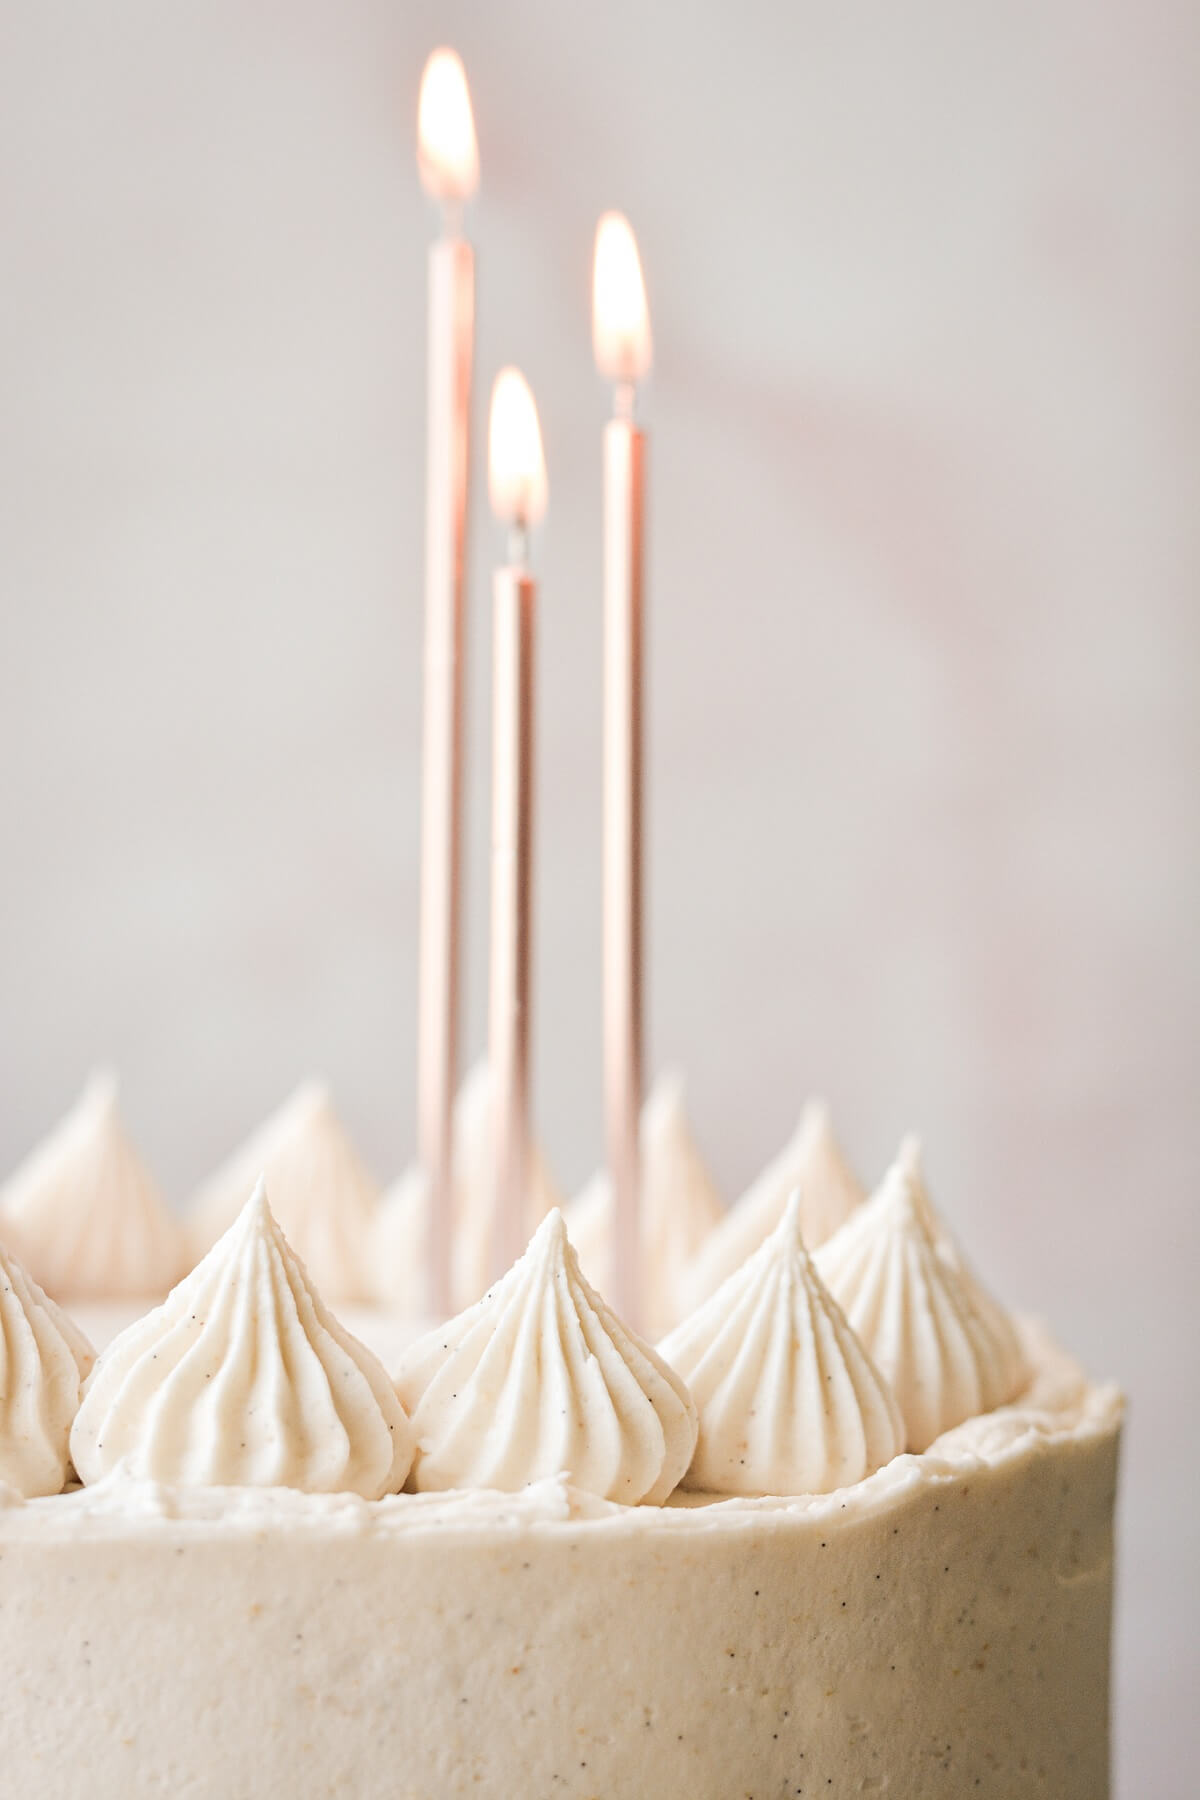 Piped buttercream and birthday candles on a banana layer cake.